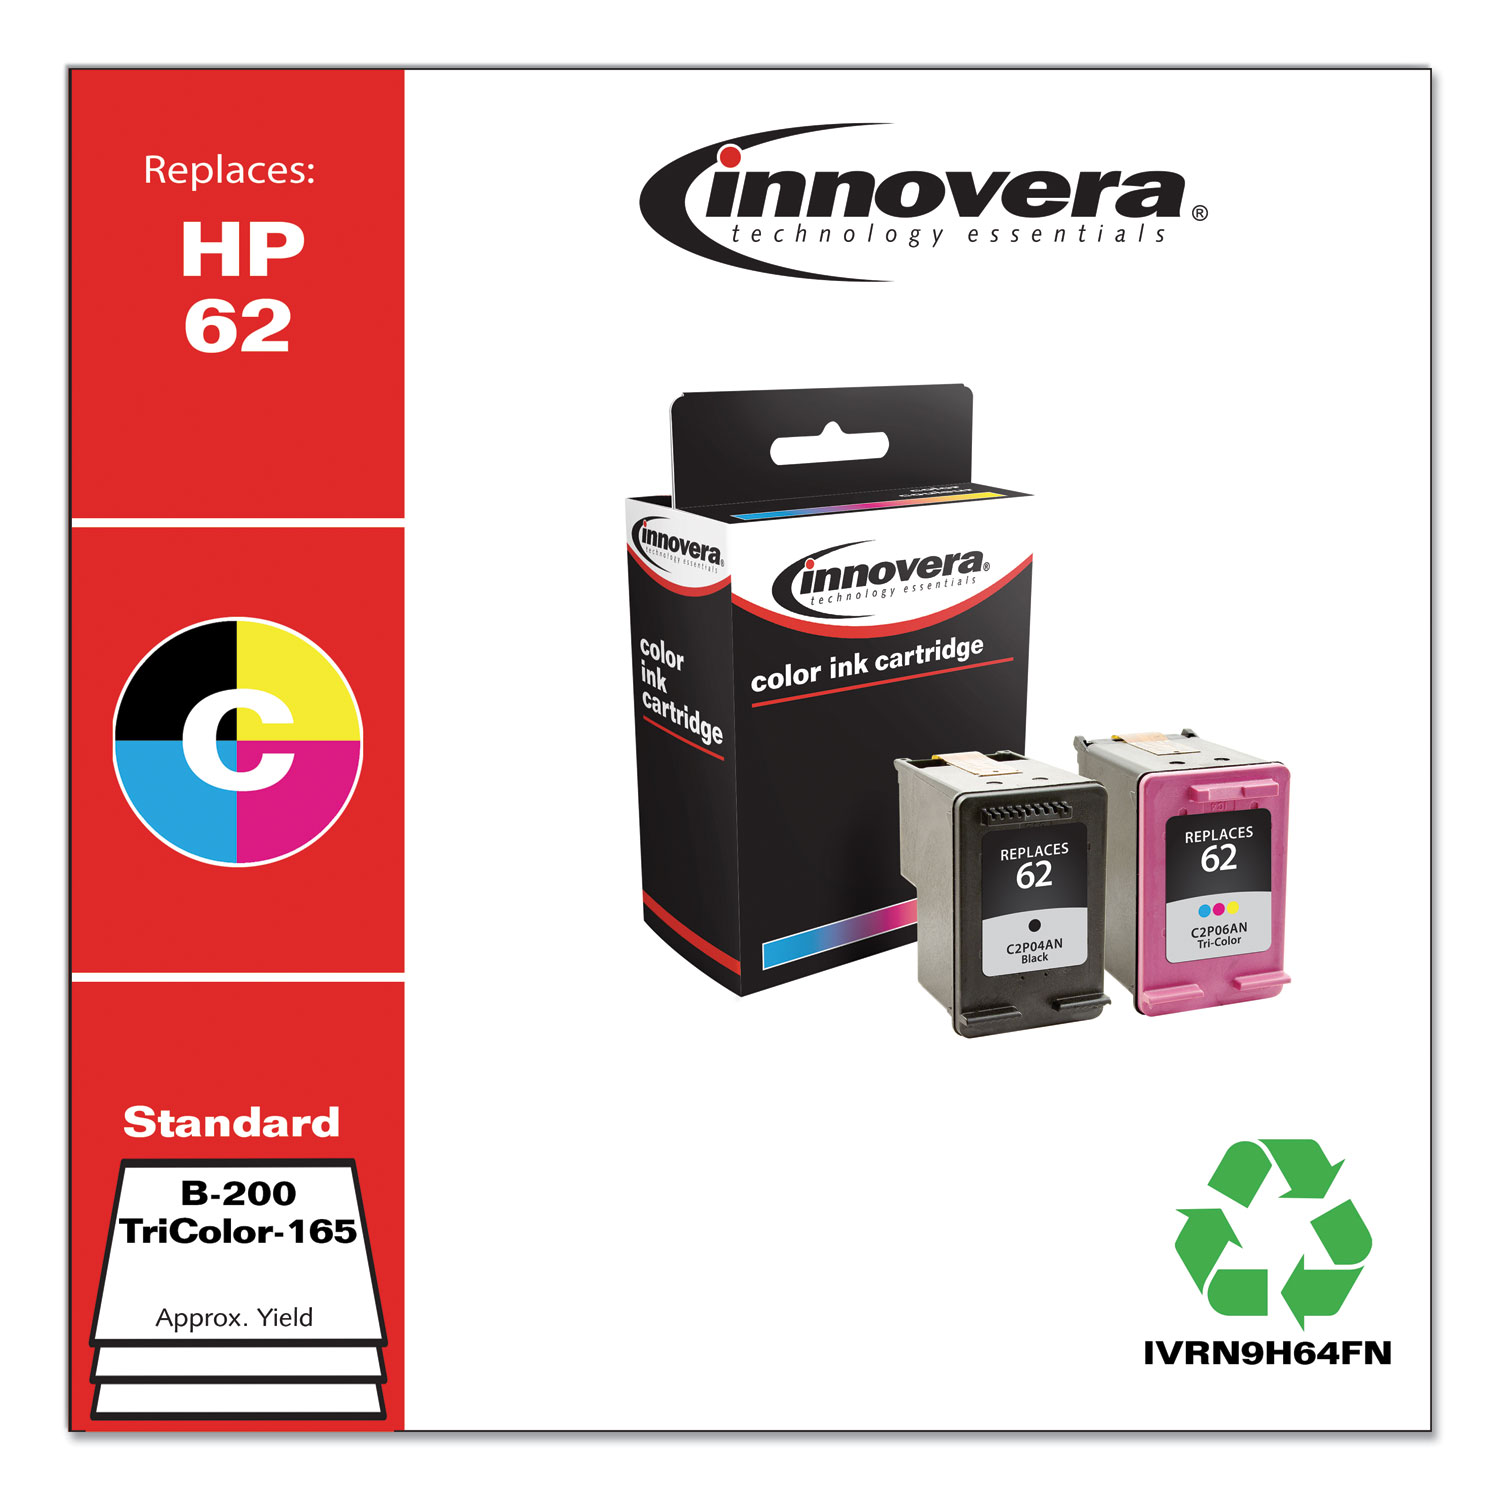  Innovera IVRN9H64FN Remanufactured Black/Tricolor Ink, Replacement for HP 62 (N9H64FN), 200/165 Page-Yield (IVRN9H64FN) 